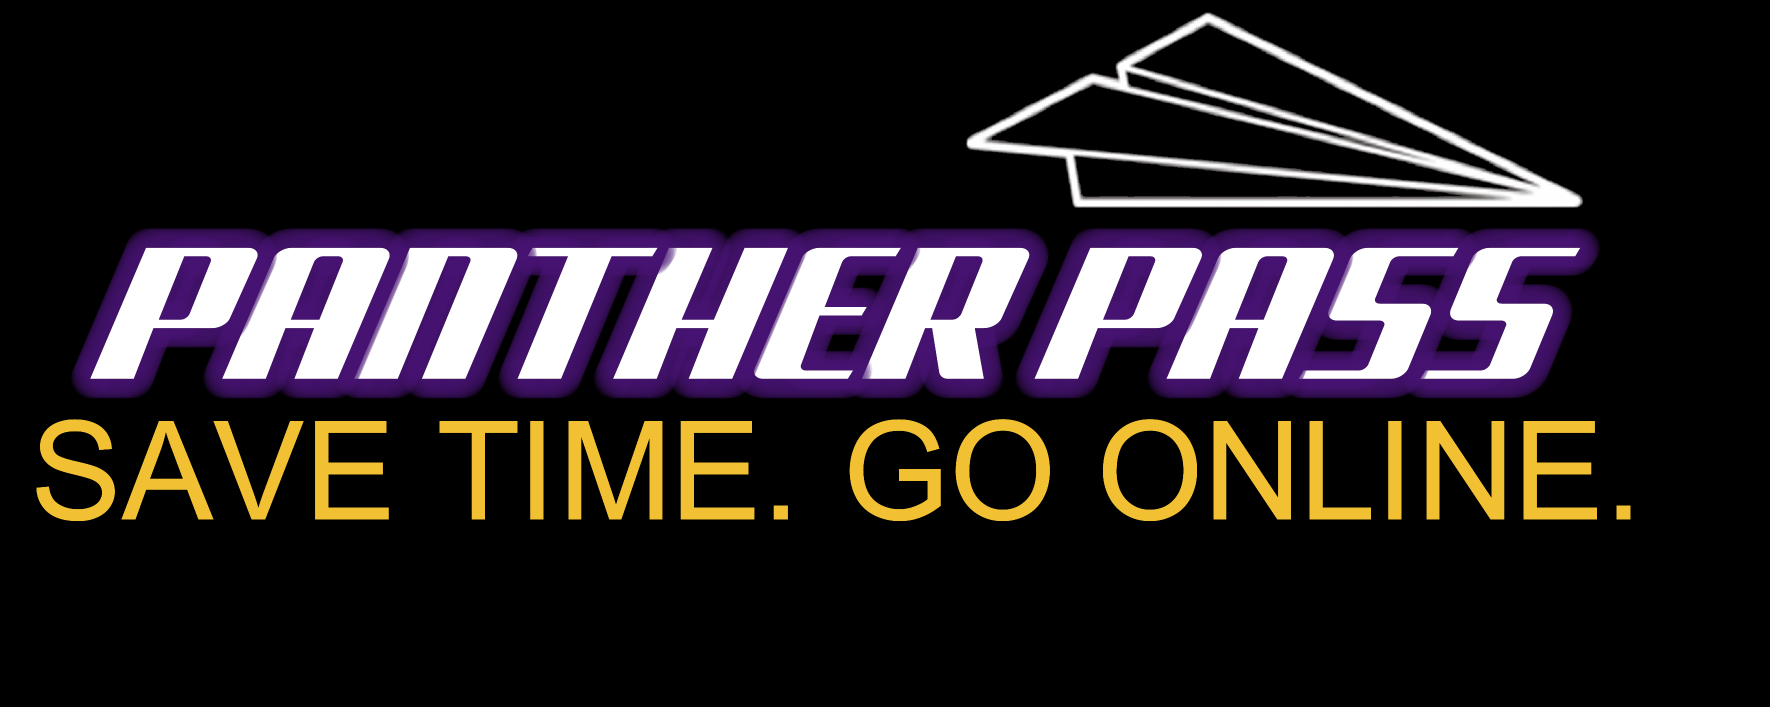 Panthter Pass - Save time go online